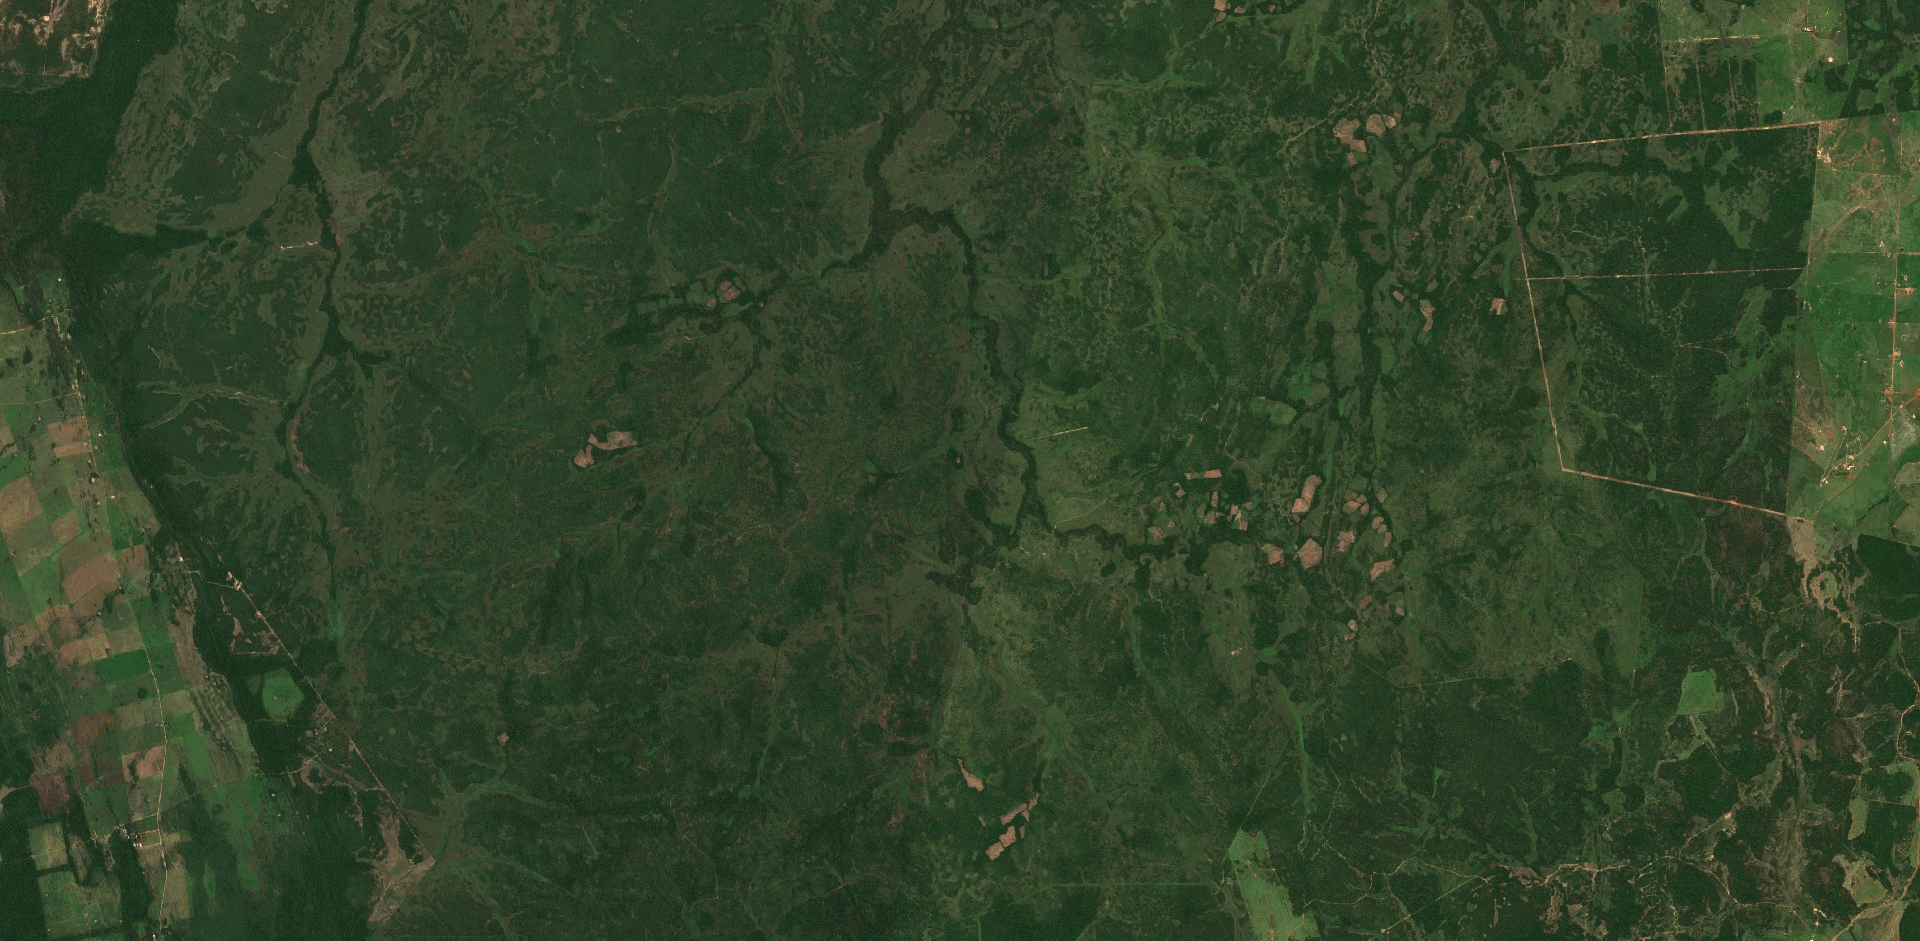 Animated before/after normalisation of a satellite image of the Amazon rainforest